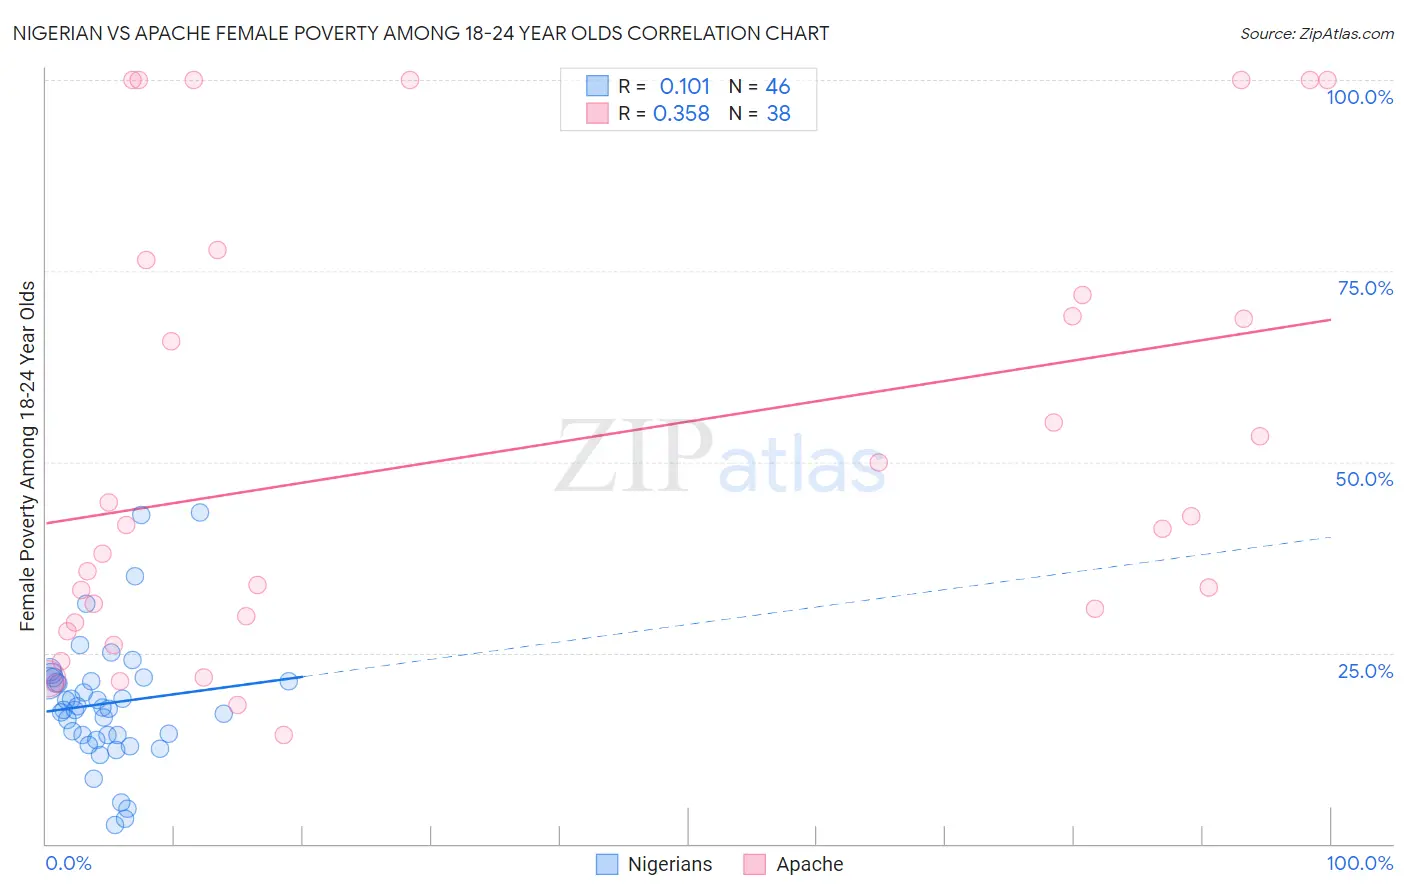 Nigerian vs Apache Female Poverty Among 18-24 Year Olds